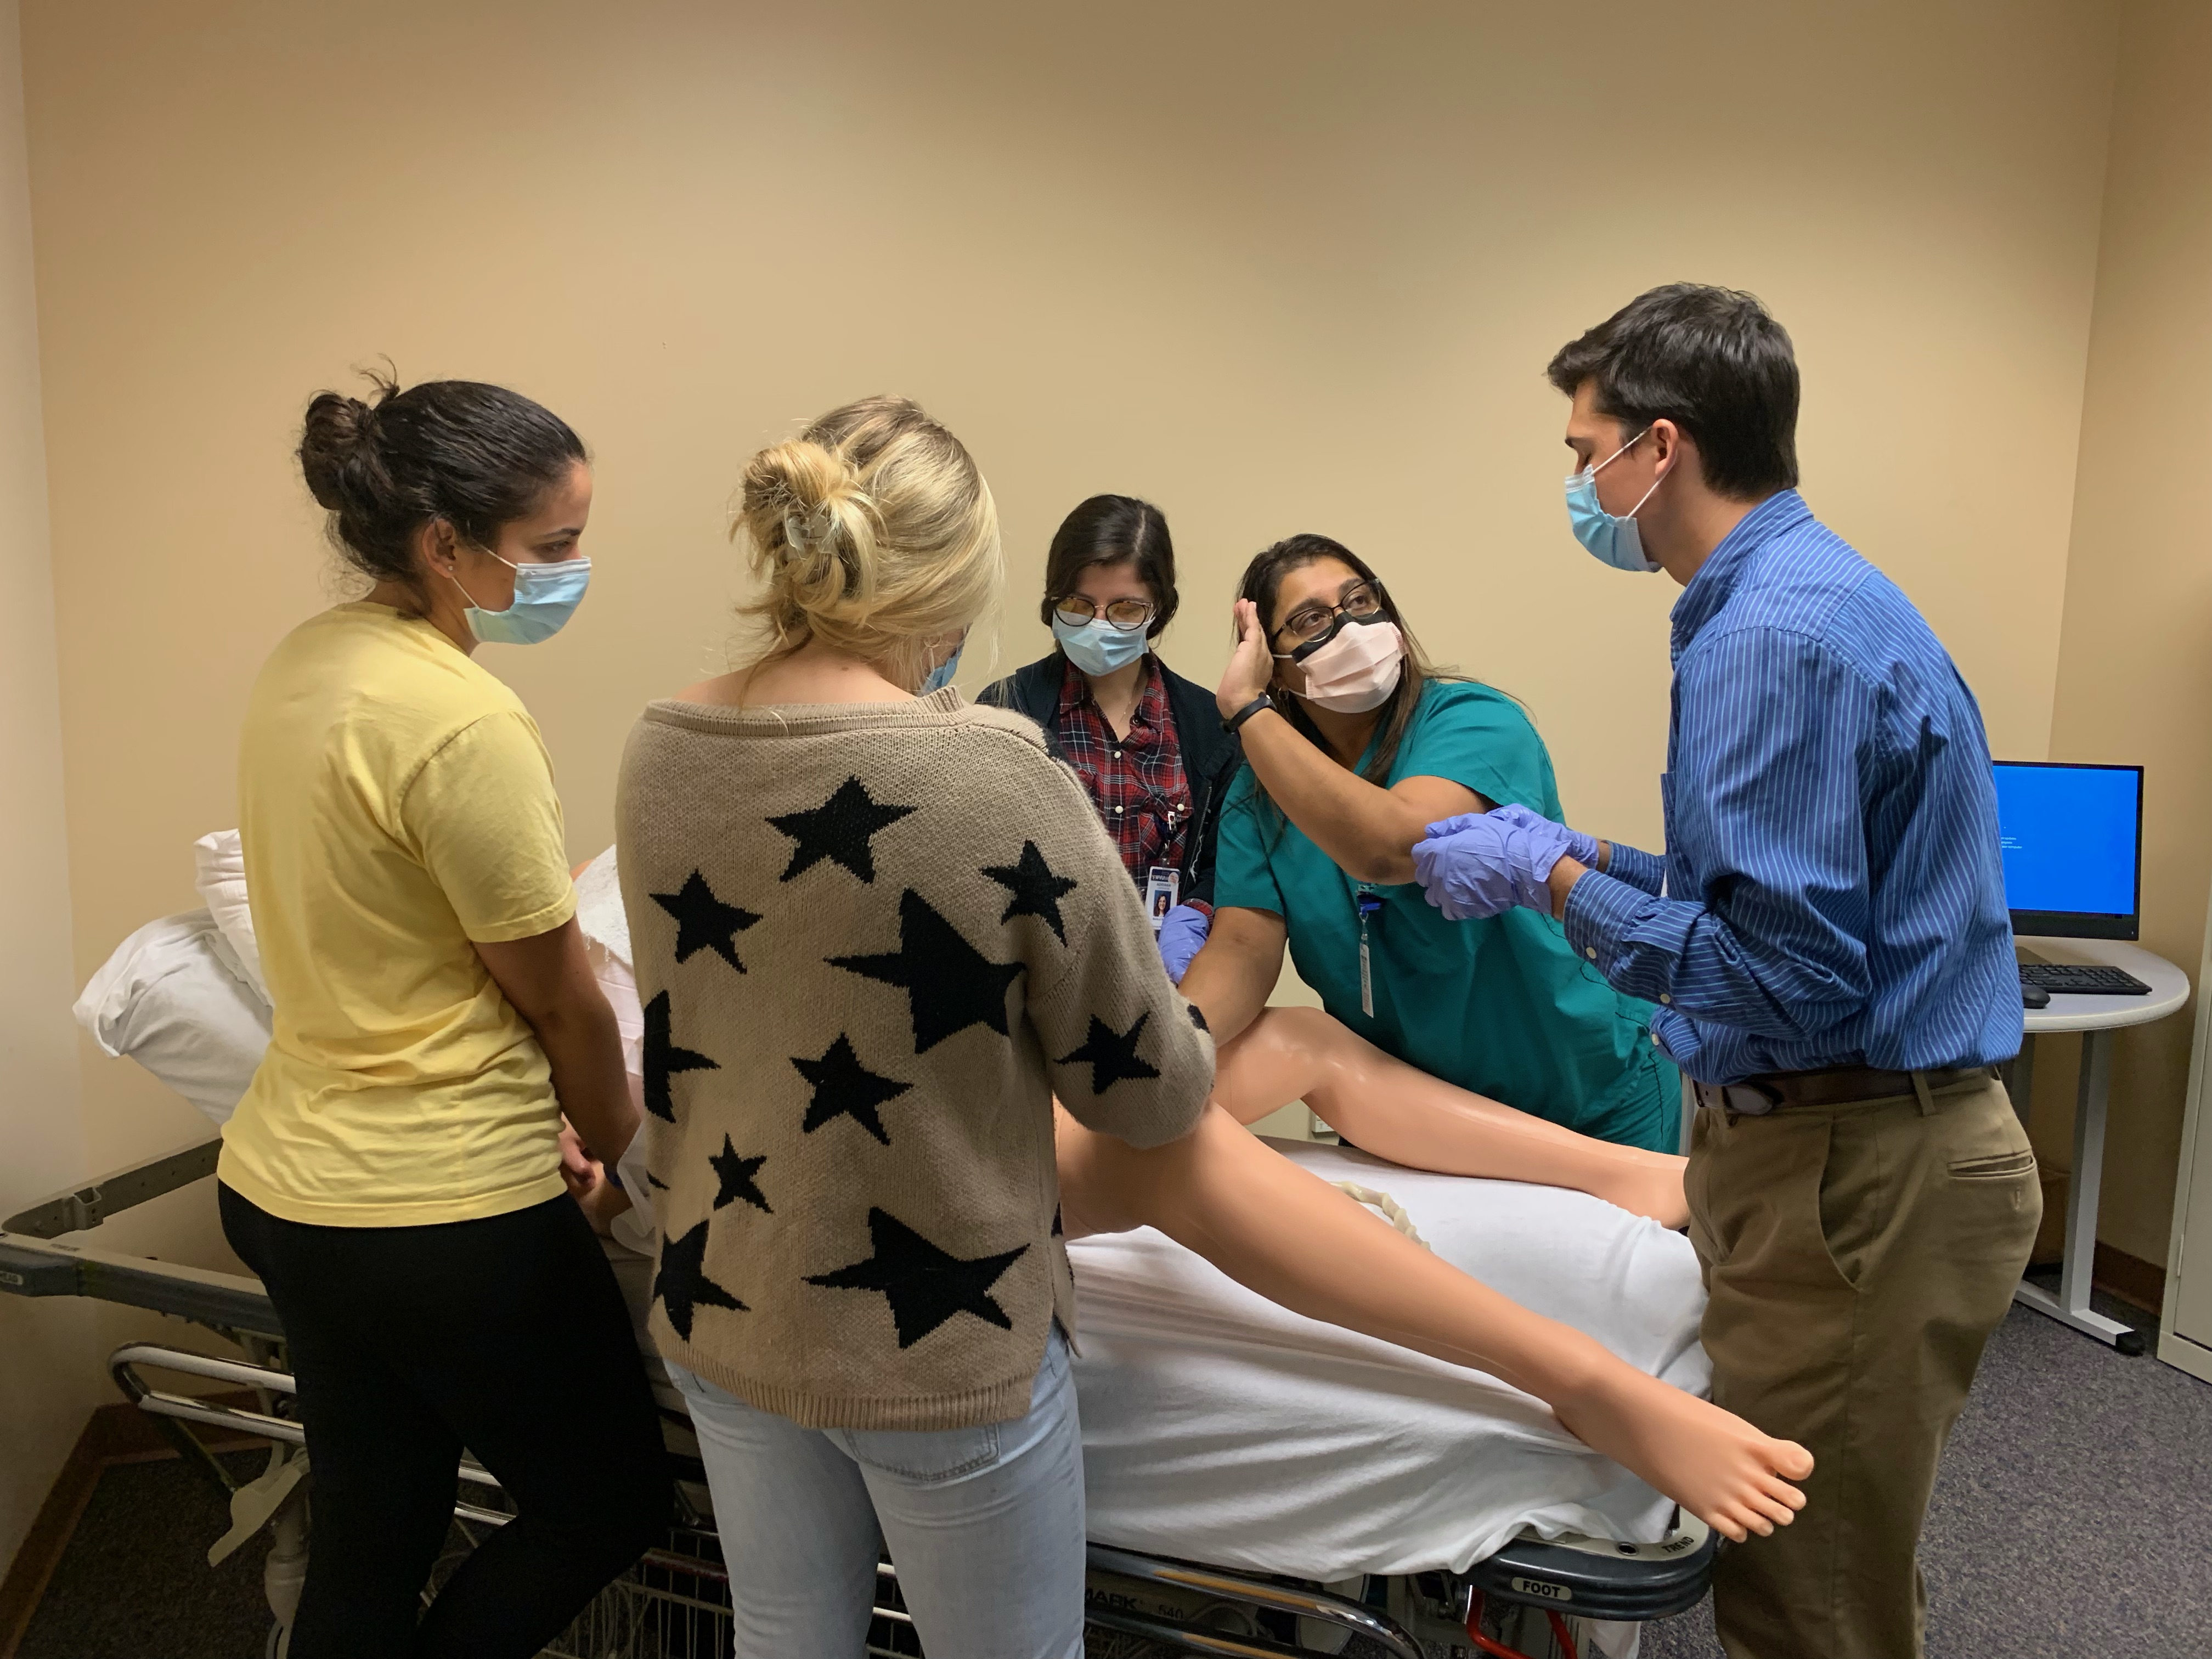 Students participate in a hands-on training session in the Birthing Simulation Lab